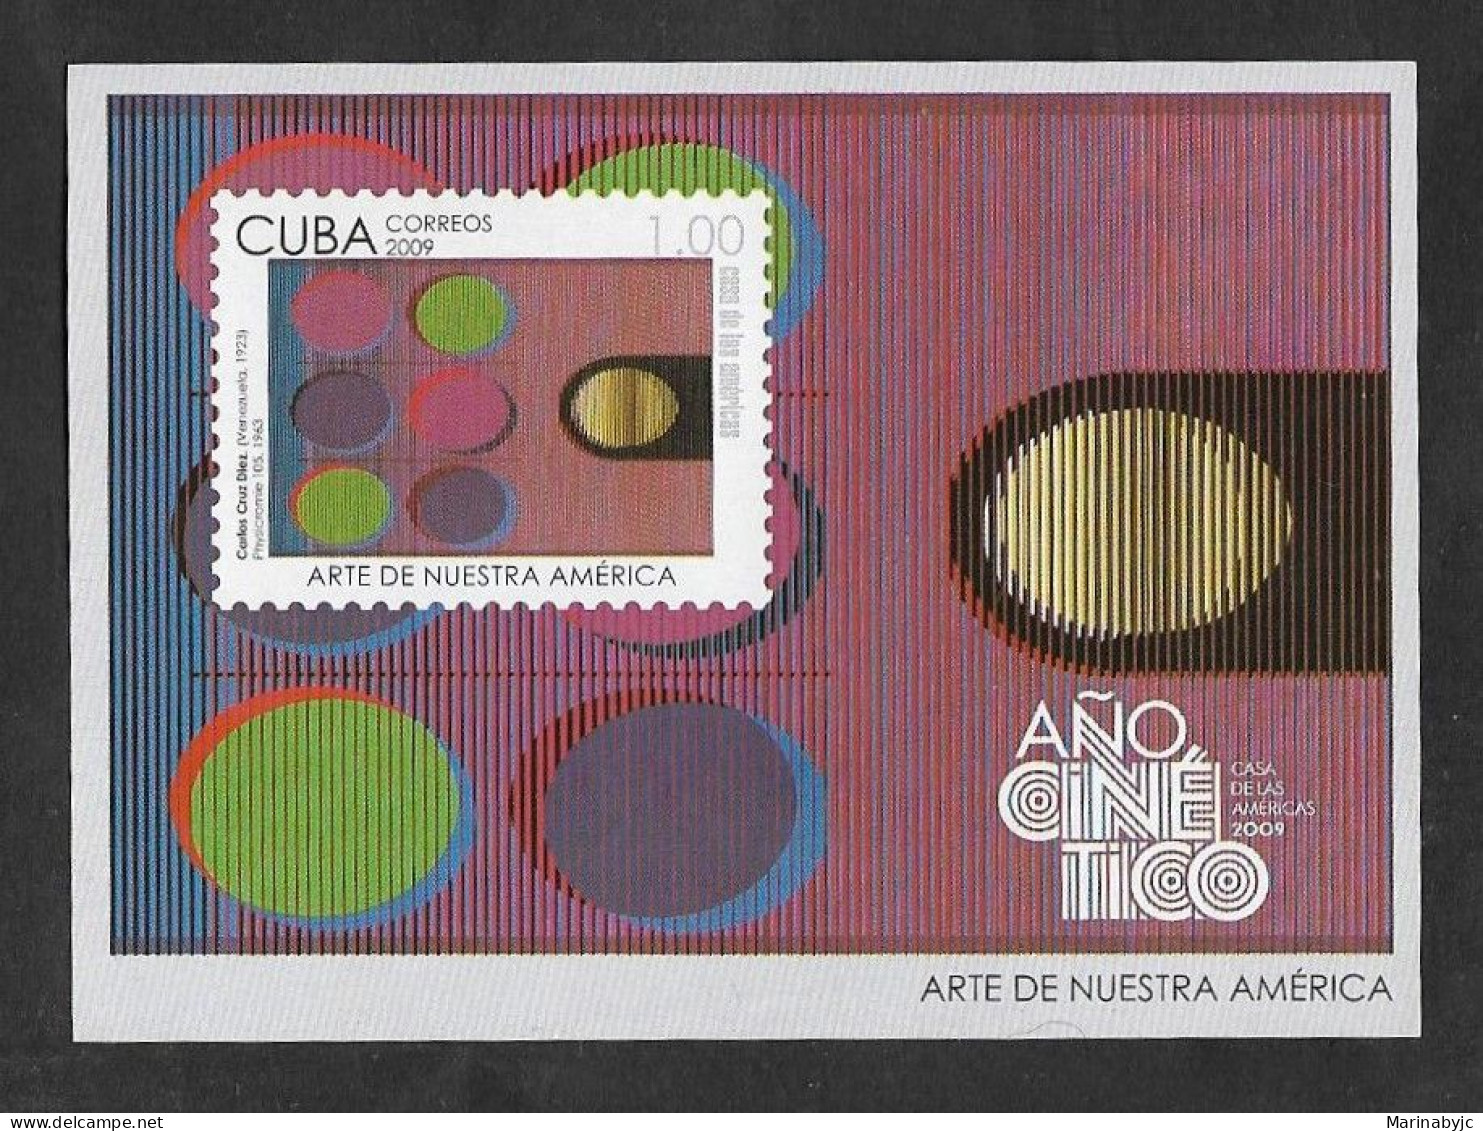 SE)2009 CUBA, FROM THE CINETIC ART SERIES, HOUSE OF THE AMERICAS, SS, MNH - Used Stamps